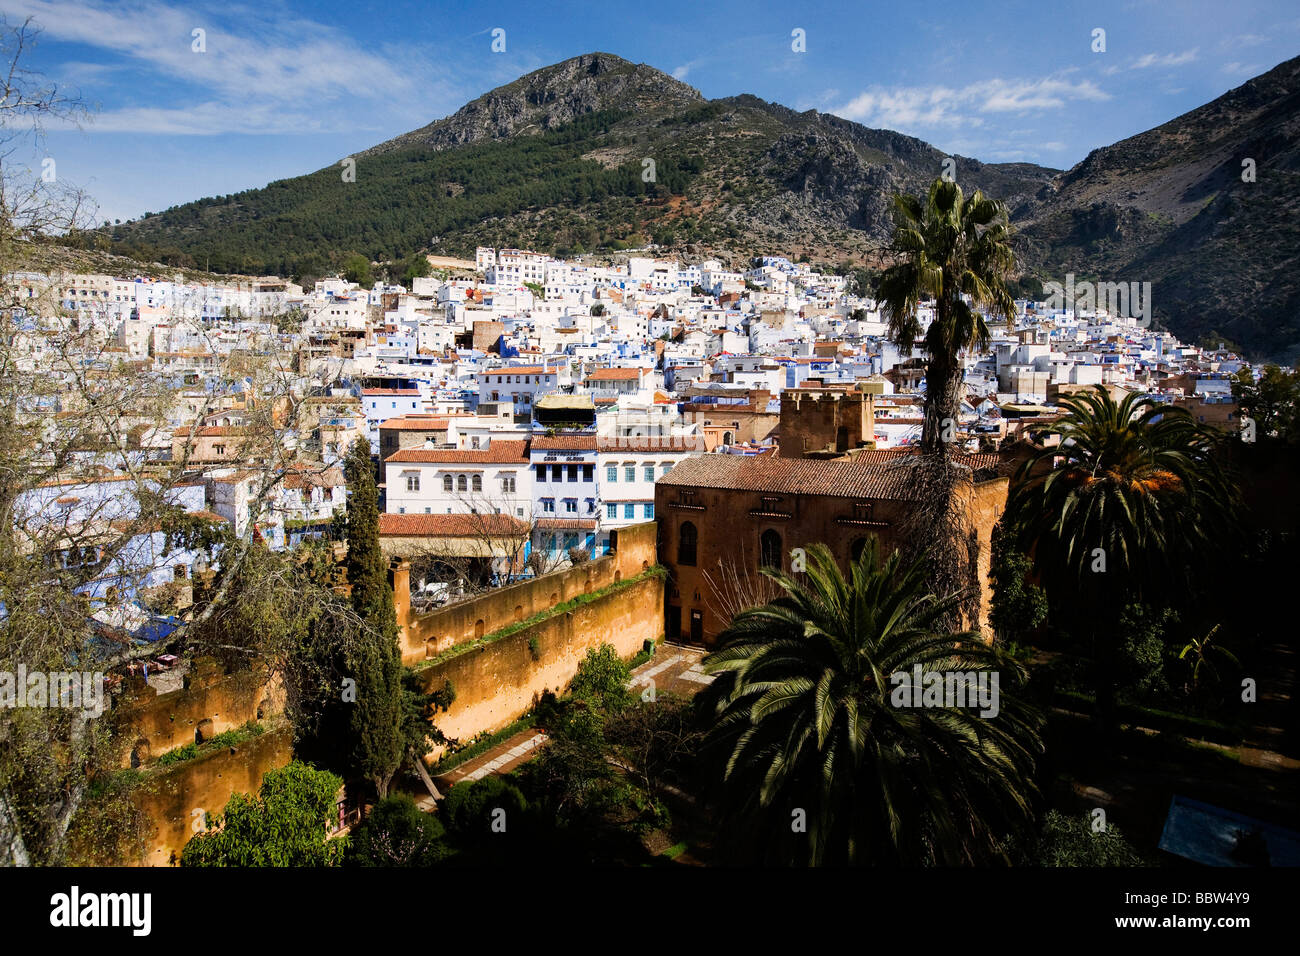 View over Chefchaouen from the Kasbah, Morocco, North Africa Stock Photo